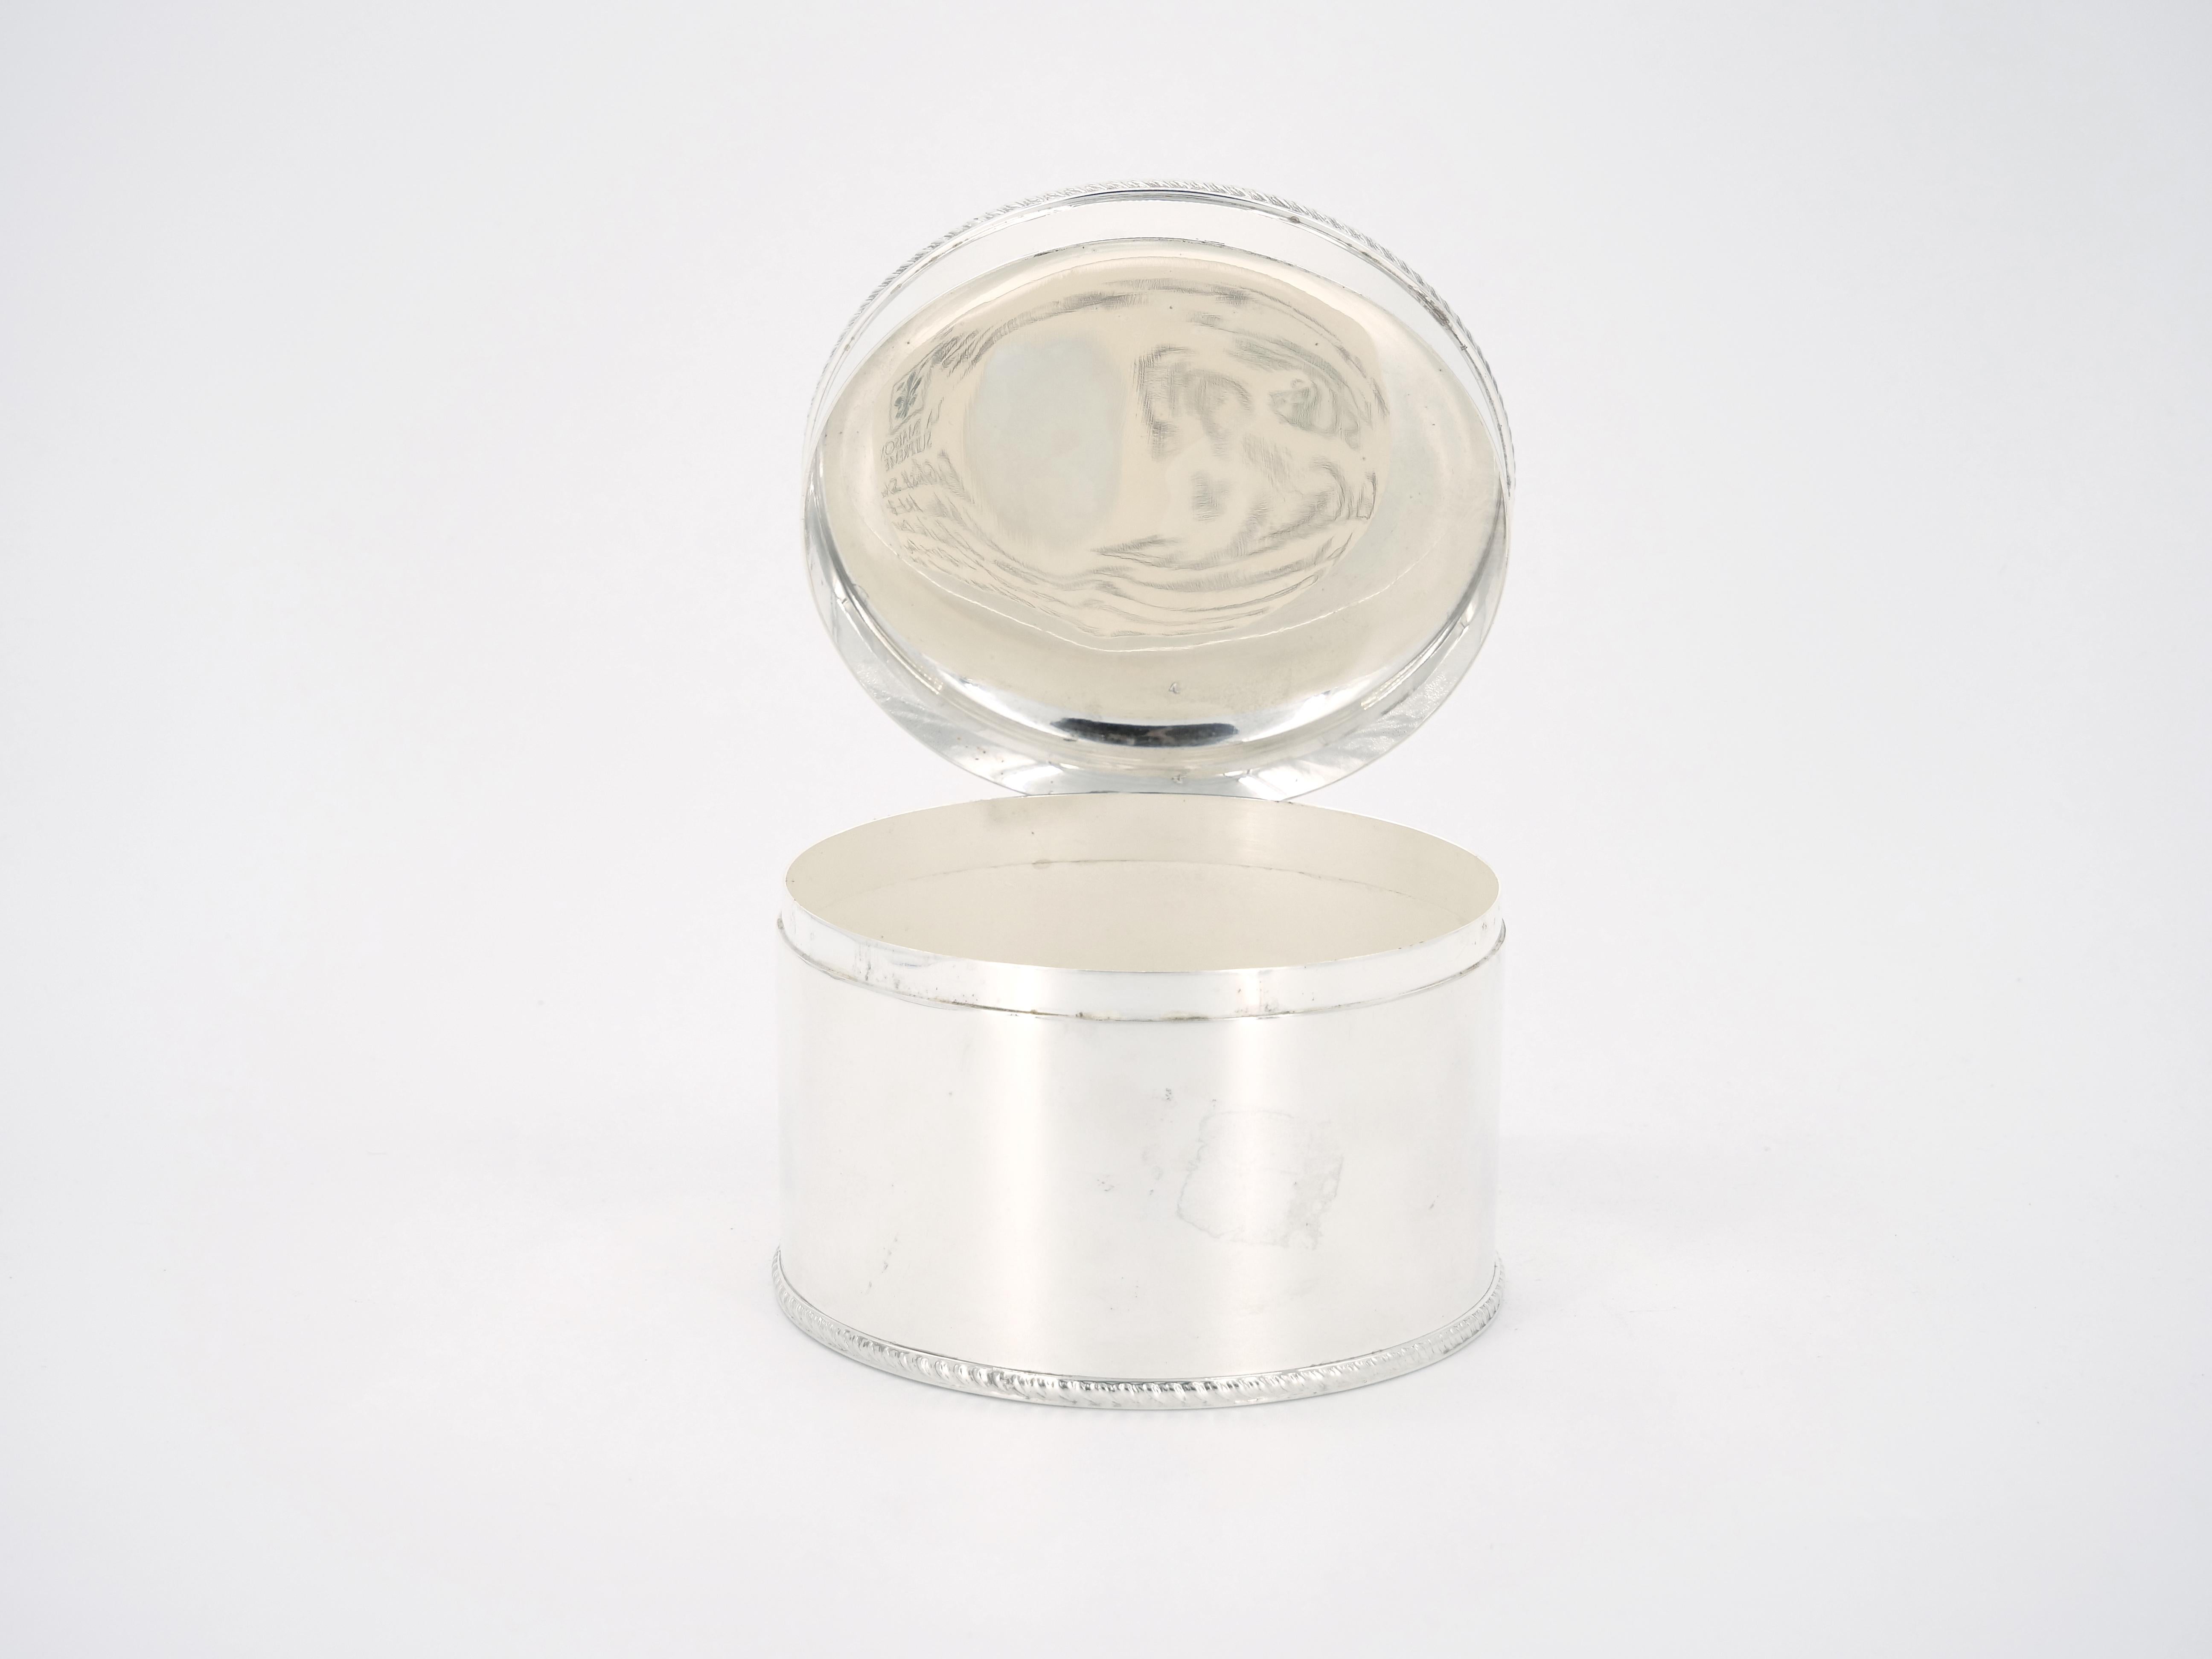 
Here is this English silver plate art deco style round shape covered cigarette / tobacco box, a must have accessory for the discerning aficionado. This exquisite box seamlessly combines elegance and functionality, making it perfect for storing and